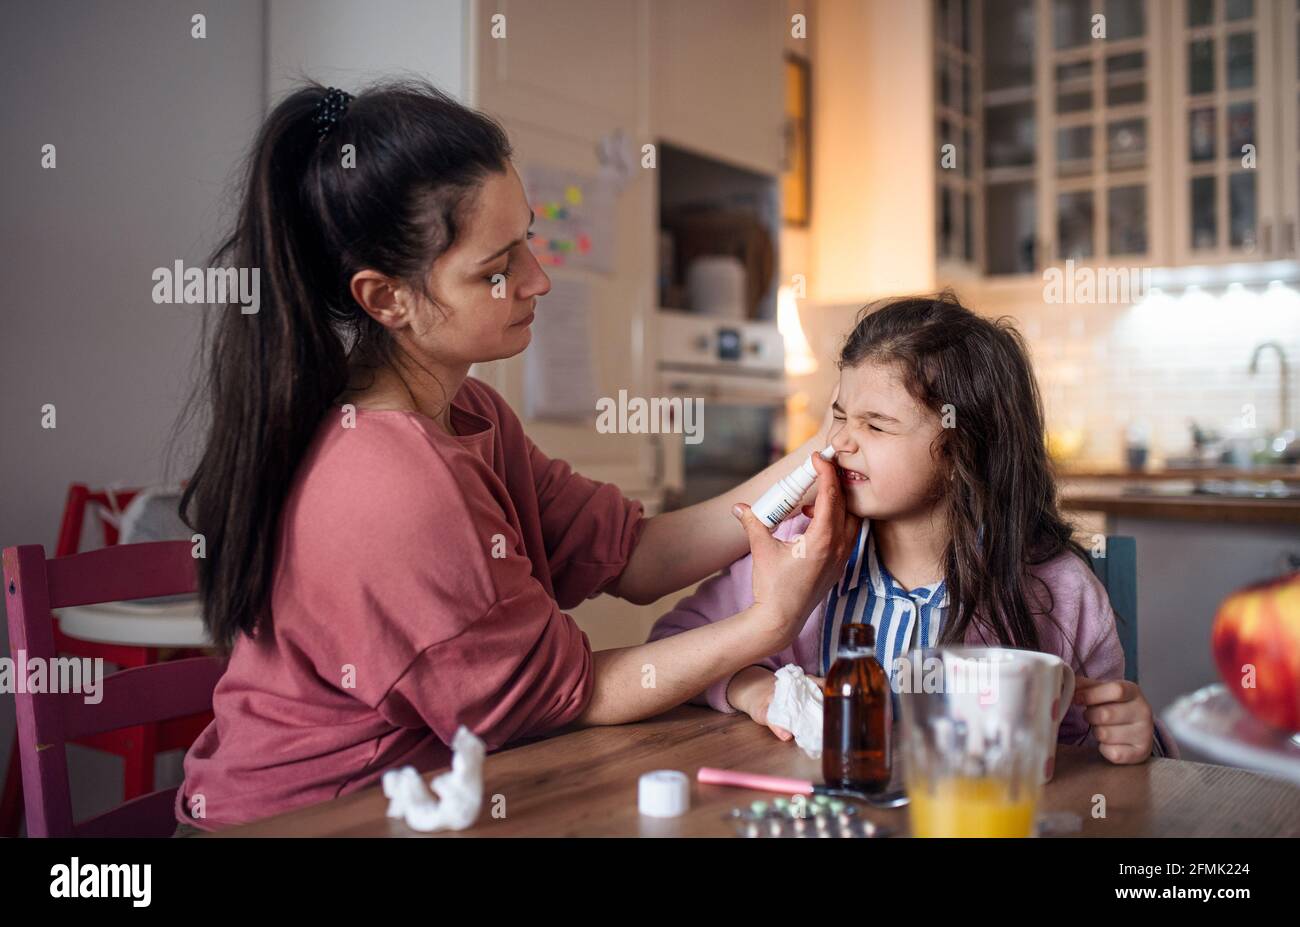 Mother looking after sick small daughter at home, using nasal spray. Stock Photo